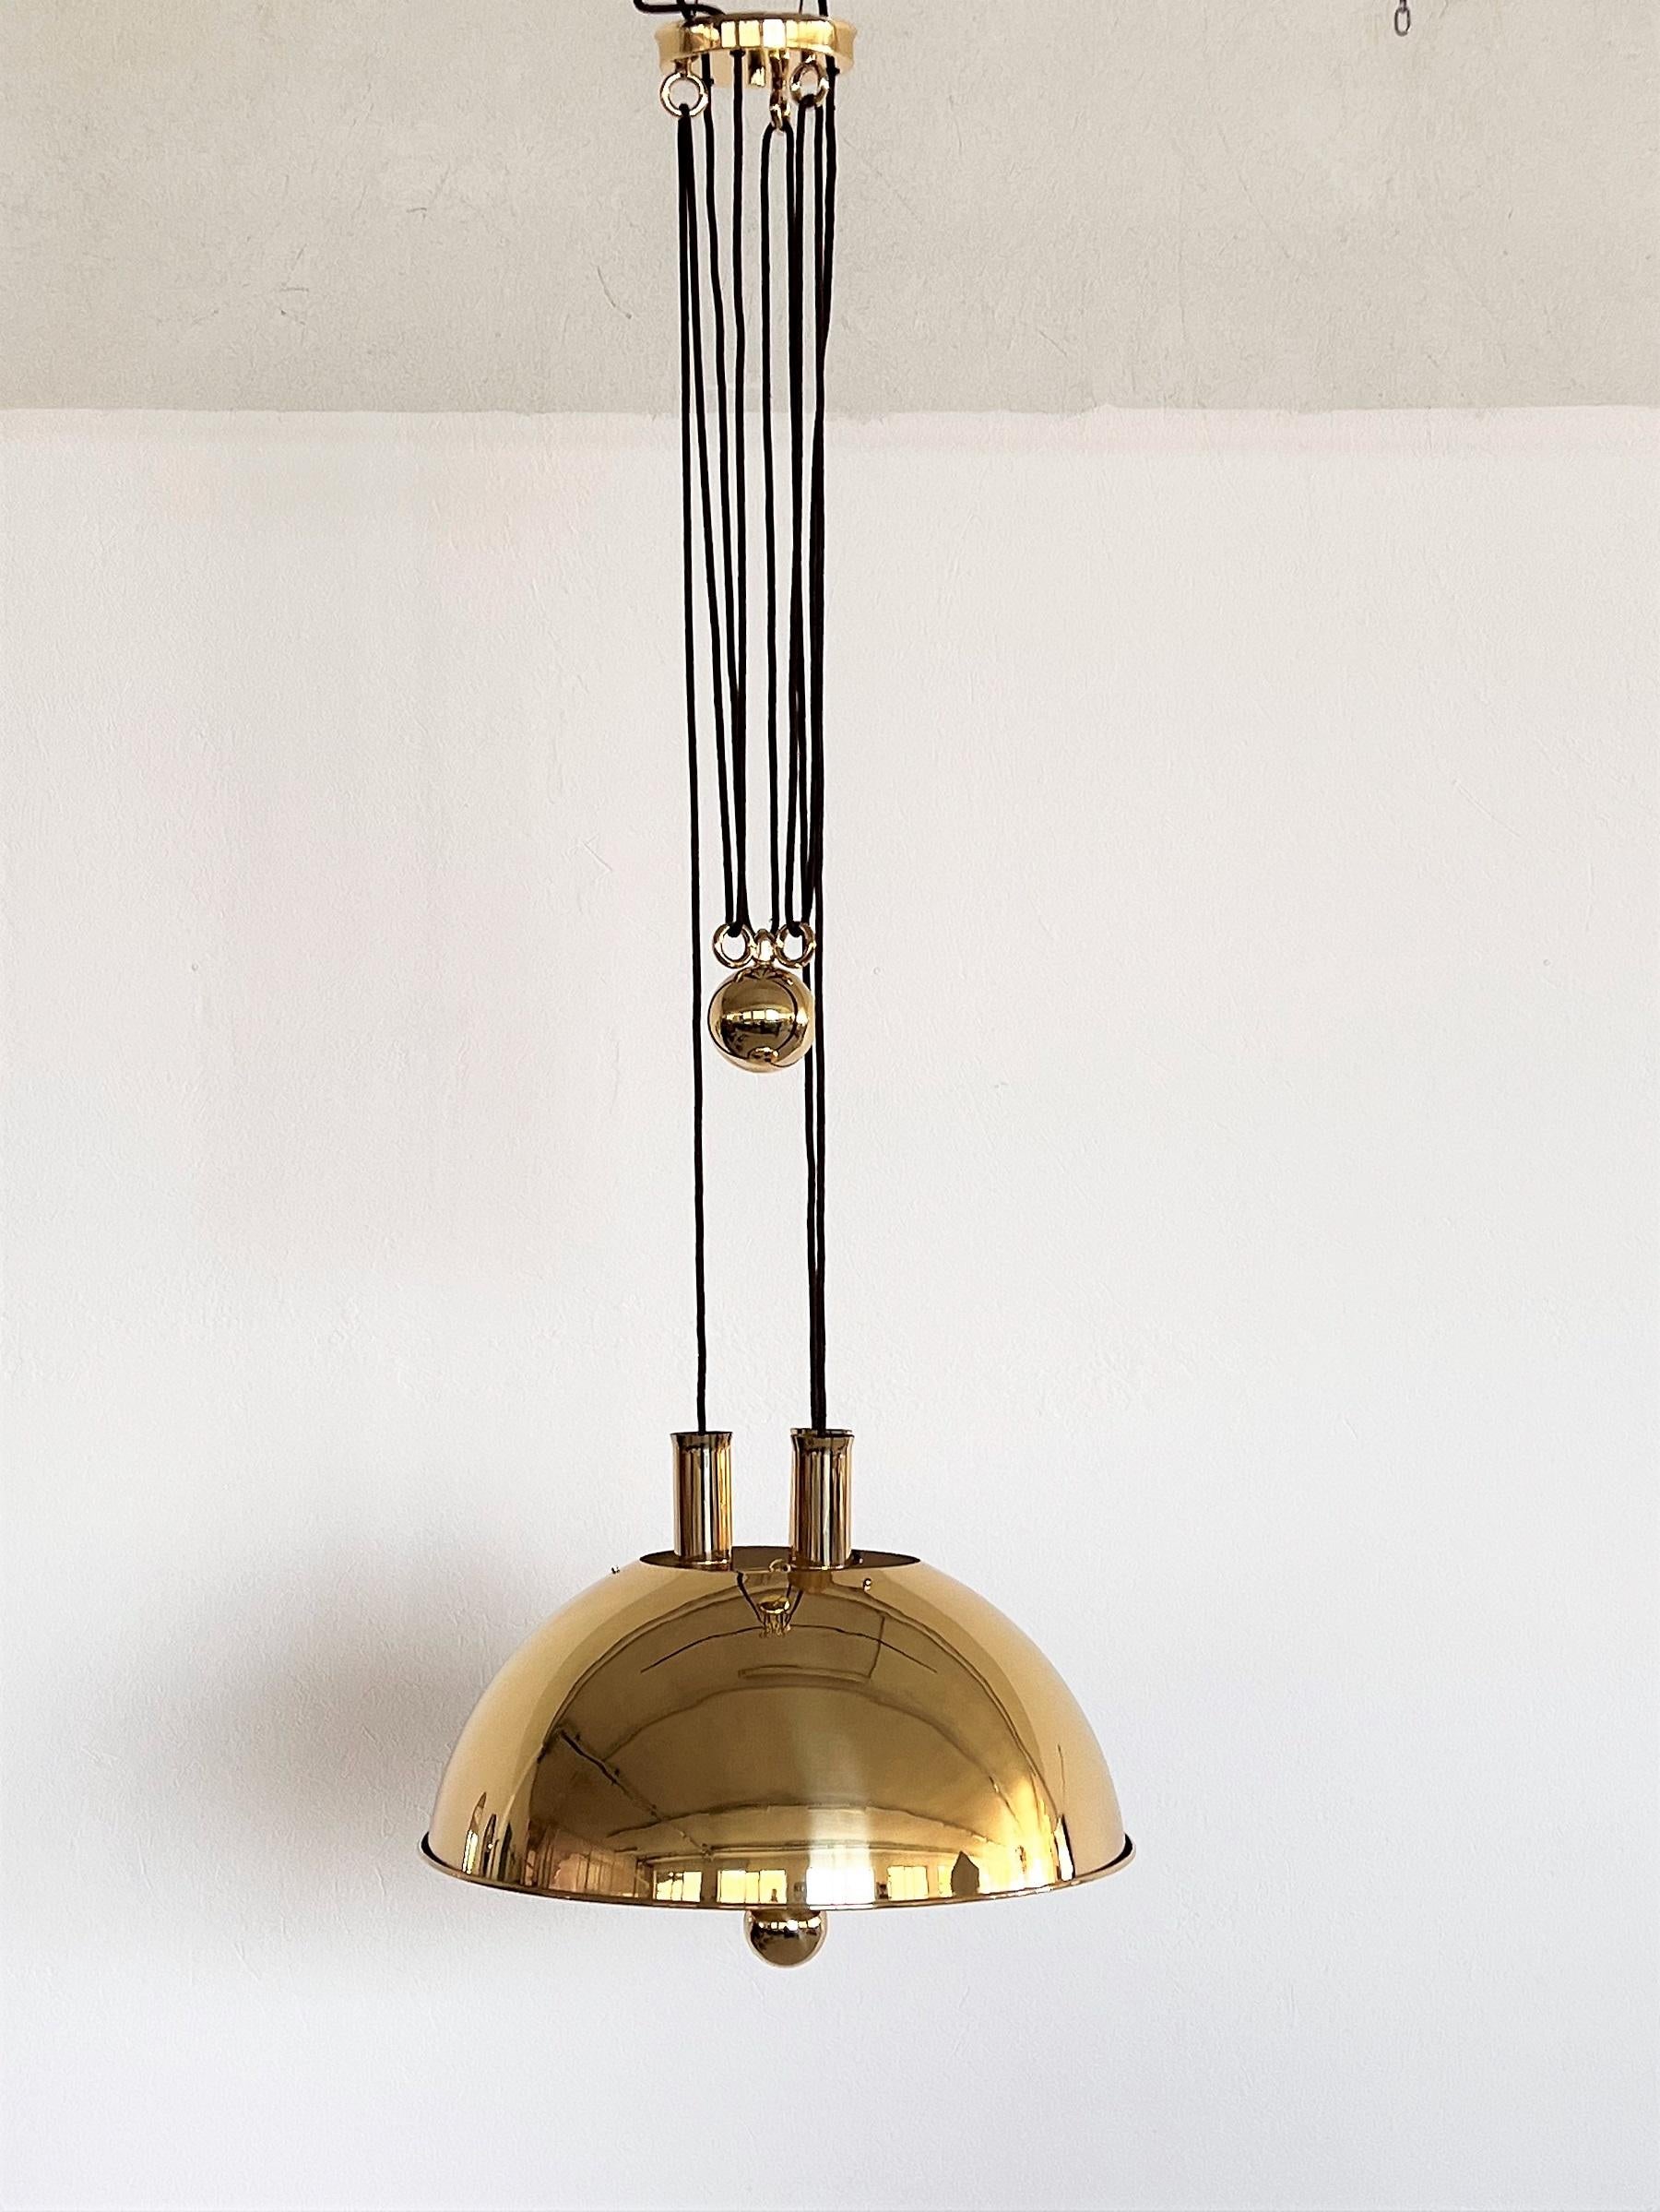 Rare and elegant, early version of large counter balance pendant light by Florian Schulz, made in Germany in the 1970s.
This model is out of production since the 1980s.
The pendant lamp is adjustable in height from 49,5in to 94,5in ( 125cm to 250cm)